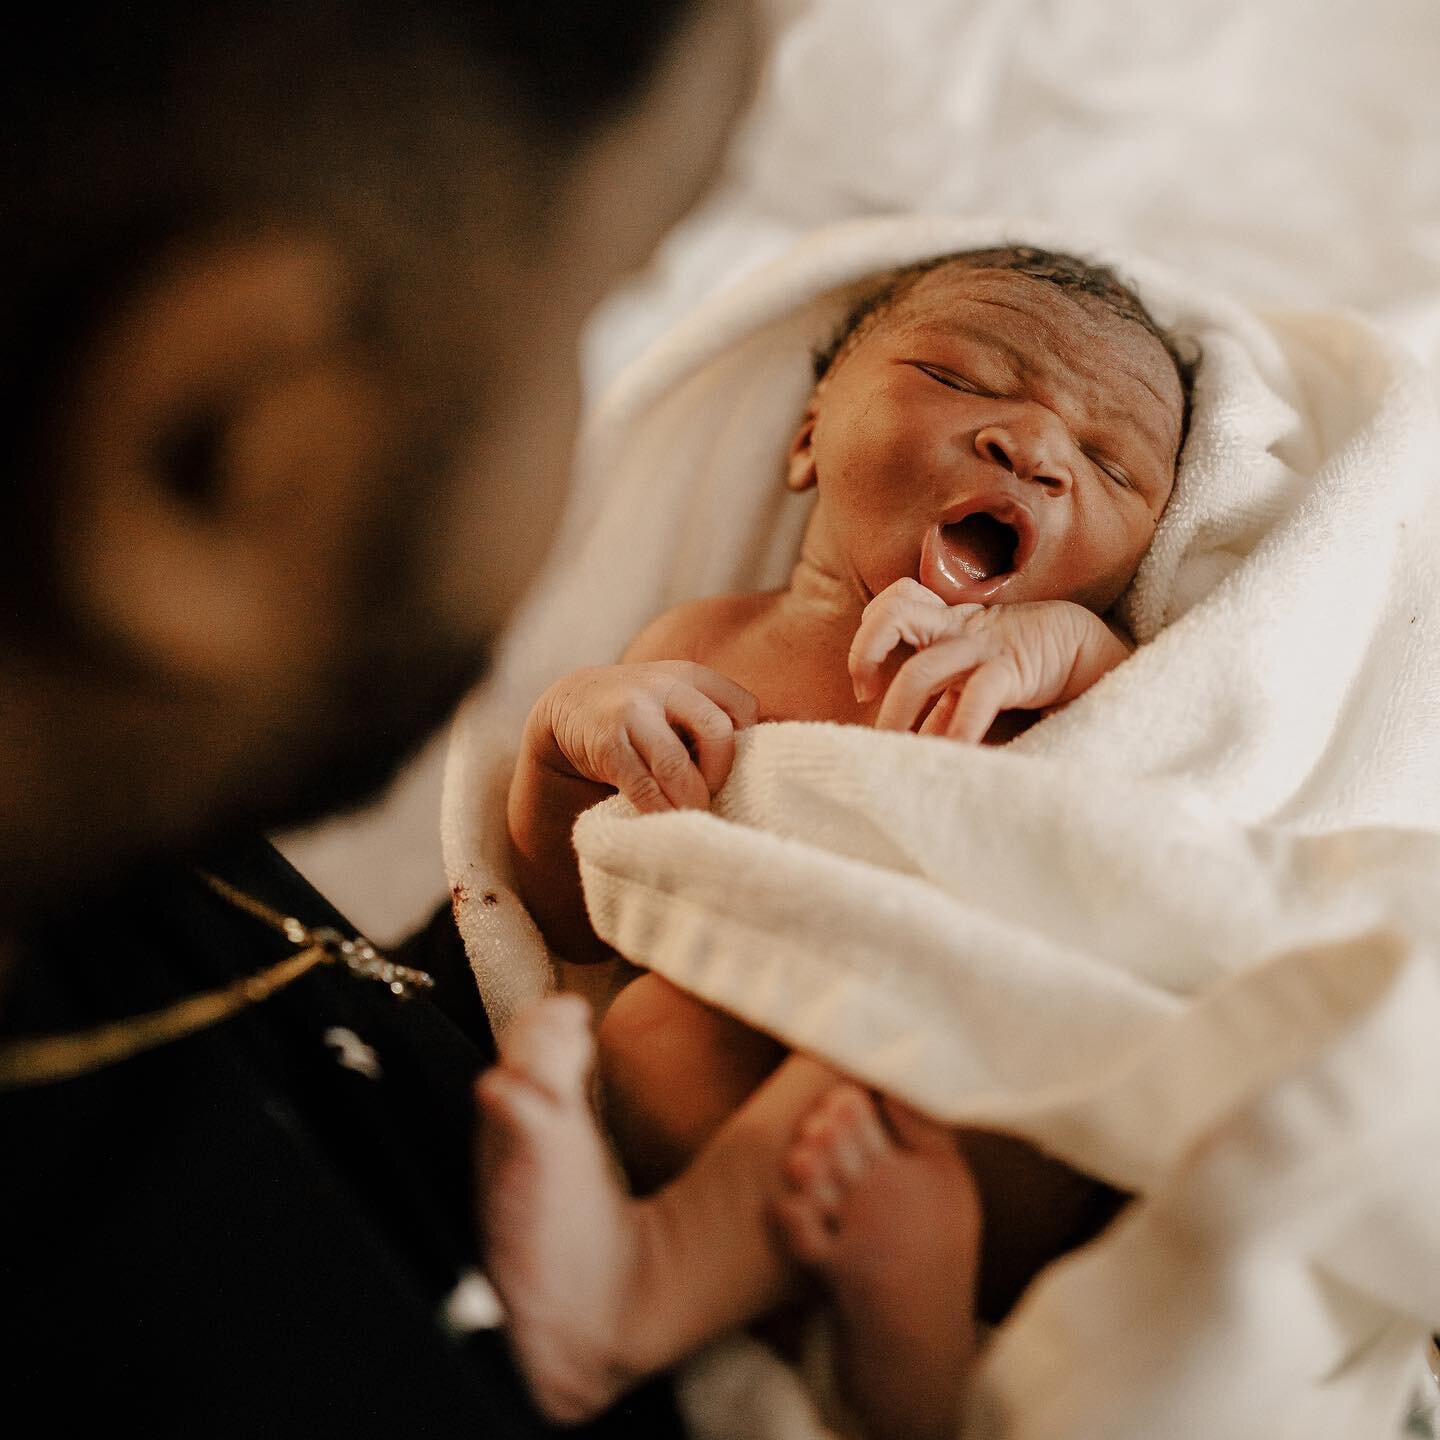 A moment just to say&hellip; thank you to all of the gifted, dedicated, and hard-working birth photographers like @rebornfromwithin, who make all of the sweet and strong moments of every delivery last forever.

We midwives sure appreciate being able 